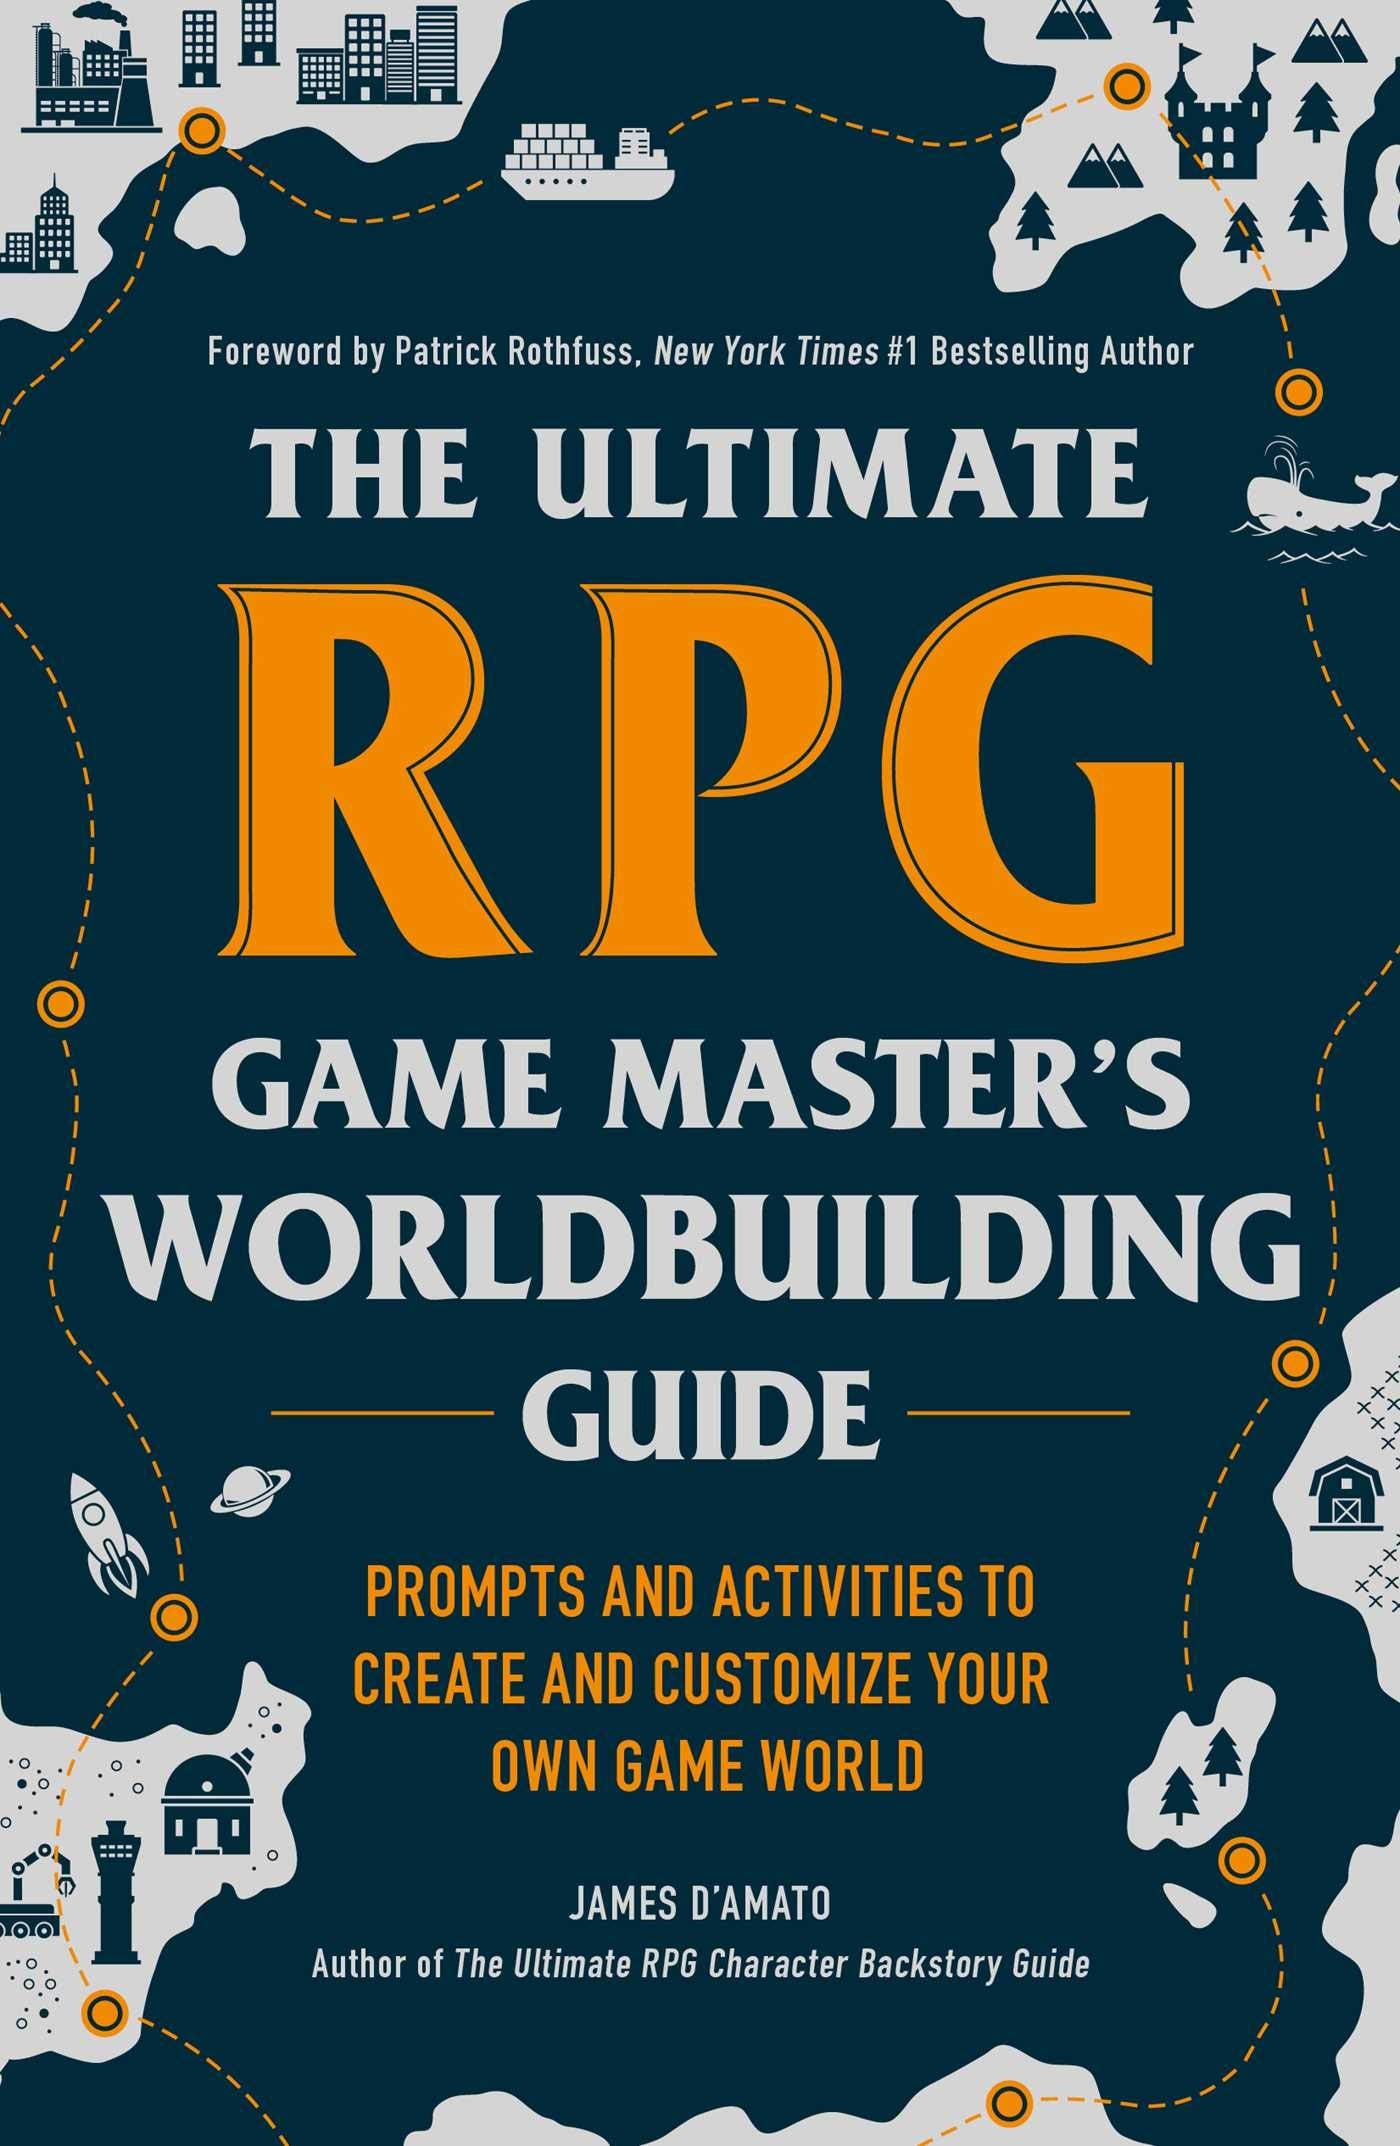 THE ULTIMATE RPG GAME MASTER'S WORLDBUILDING GUIDE